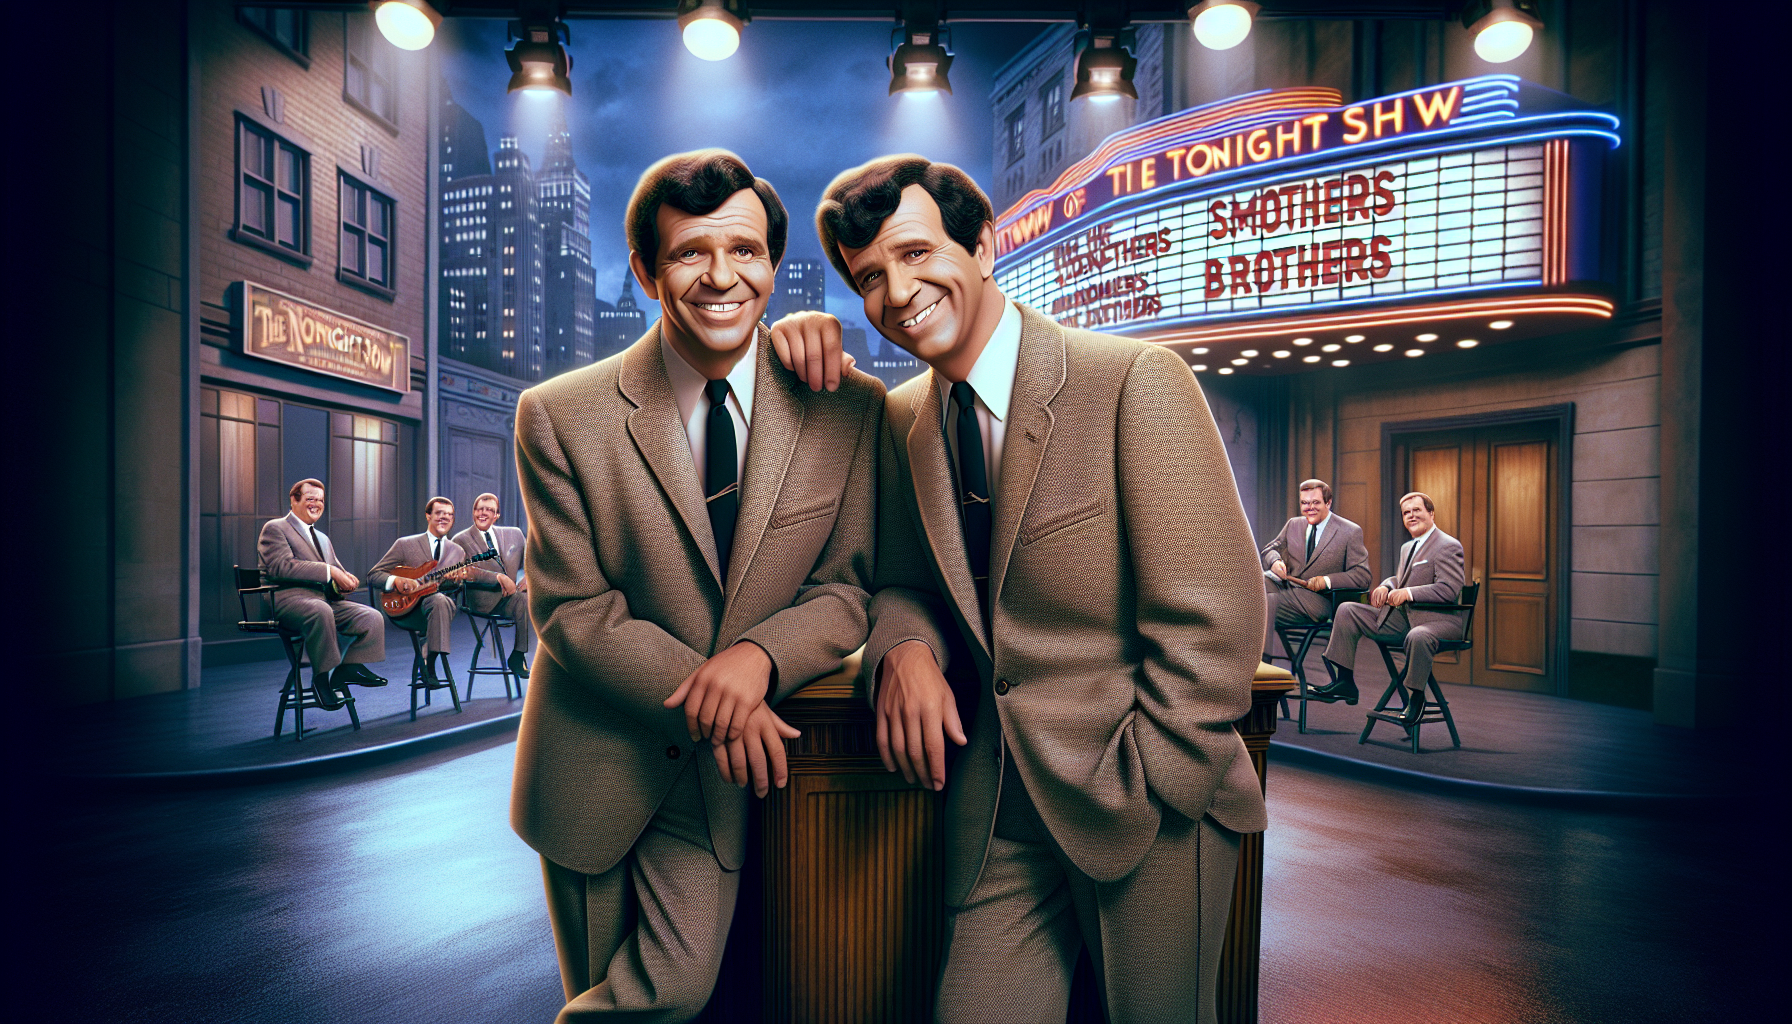 The Enduring Comedy Team of the Smothers Brothers: A 34-Year Journey